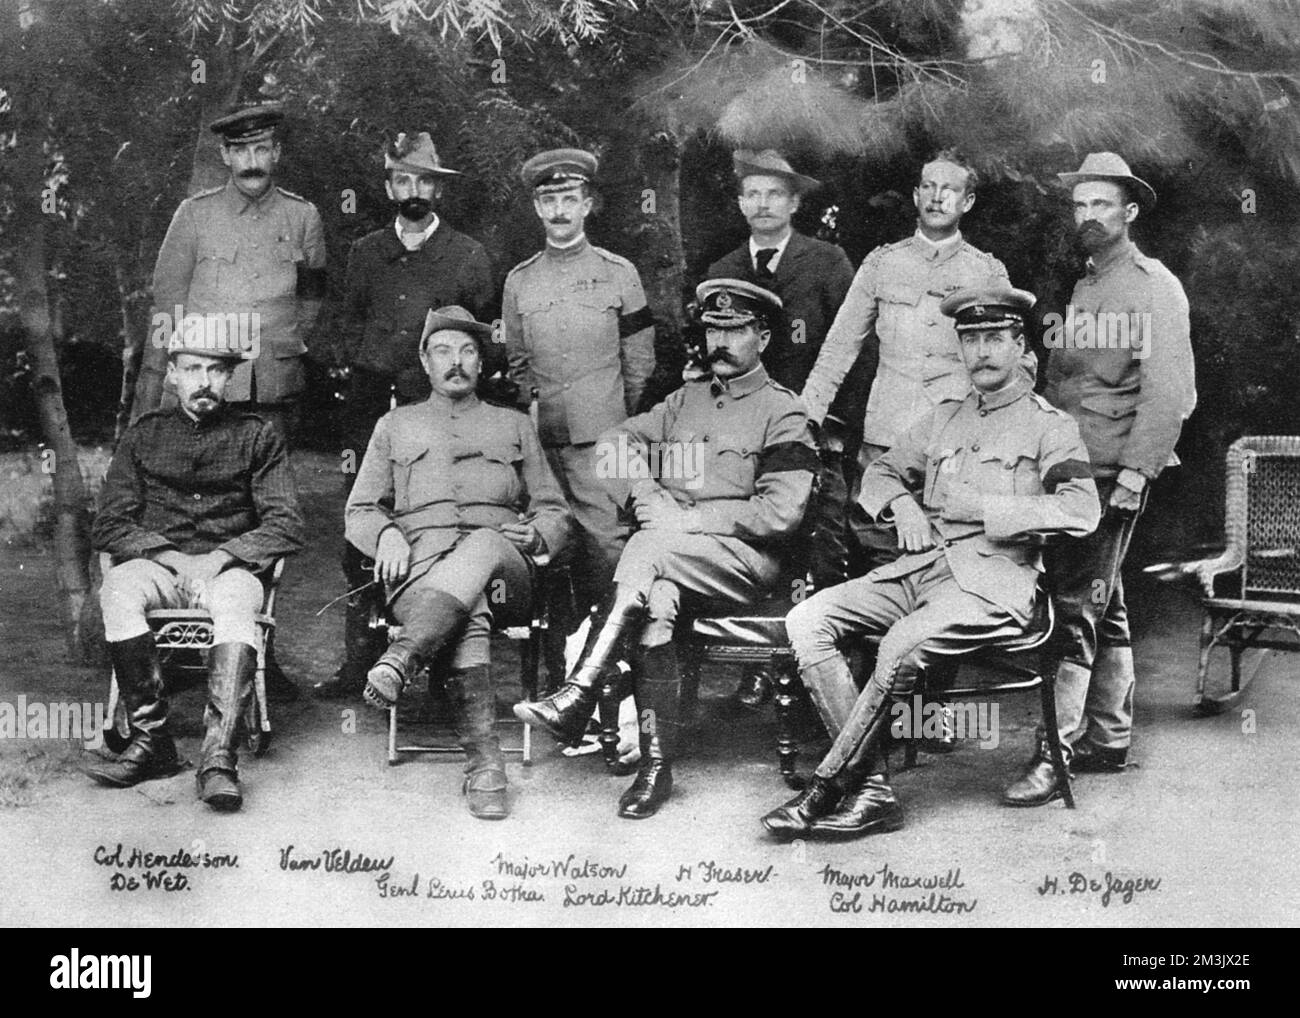 Lord Kitchener (1850 - 1916), seated at the peace conference that brought the Boer War of 1899-1902 to an end. Kitchener became Commander-in-Chief of the British war effort in South Africa from 1900. Also among those present is General Louis Botha (1862-1919) who commanded the Boer forces during the war and in 1910 became first premier of the Union of South Africa.     Date: 1902 Stock Photo